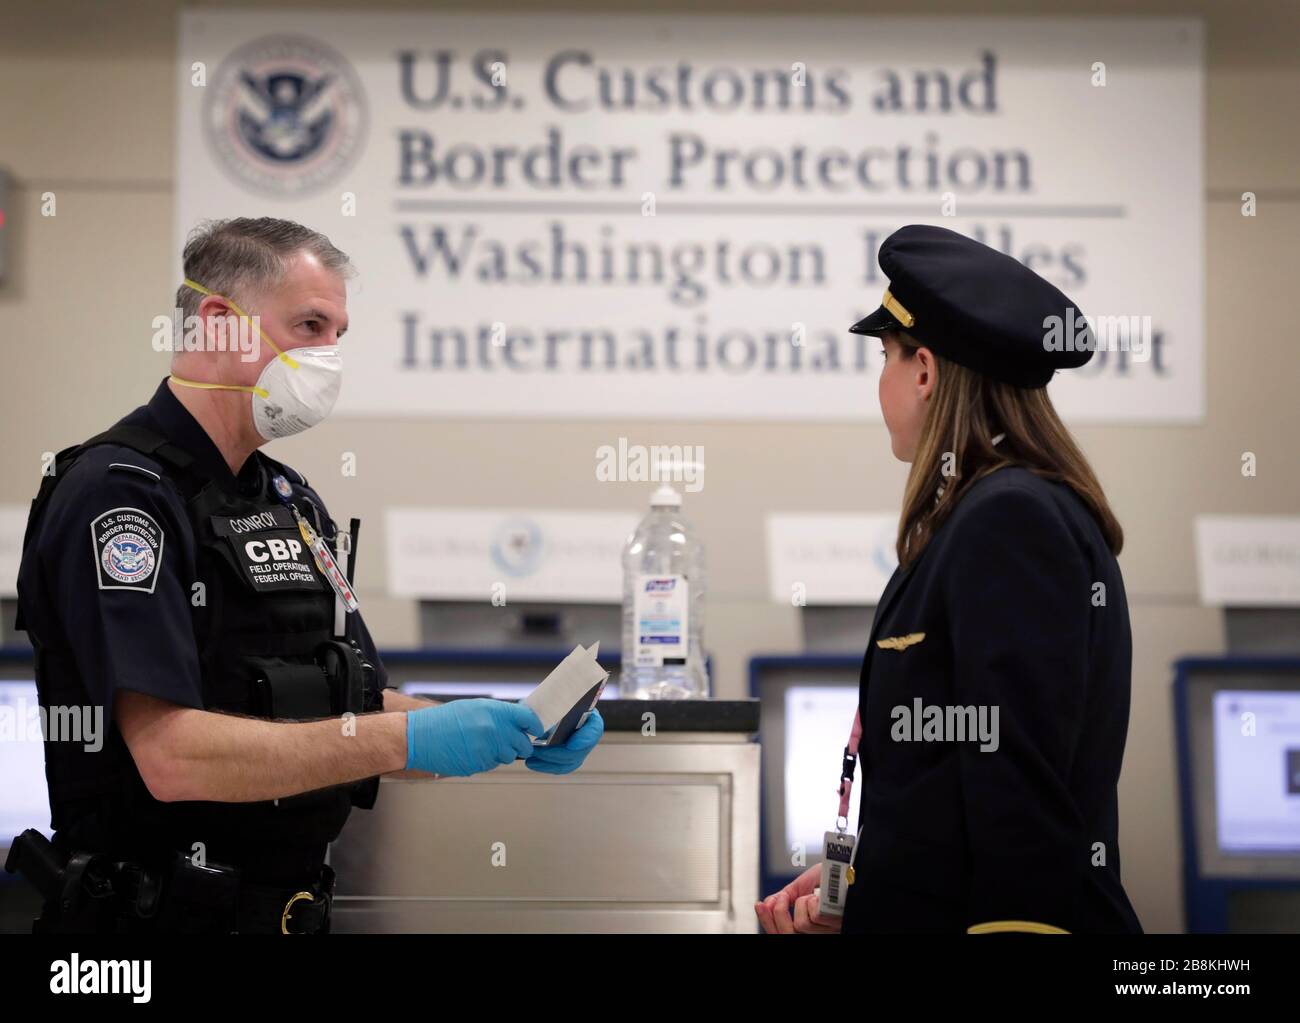 A U.S. Customs and Border Protection officer screens international passengers arriving at Dulles International Airport wearing personal protective equipment March 13, 2020 in Dulles, Virginia. In response to the COVID-19, coronavirus pandemic CBP officers and travelers have begun wearing gloves and masks as protection from viral exposure. Stock Photo